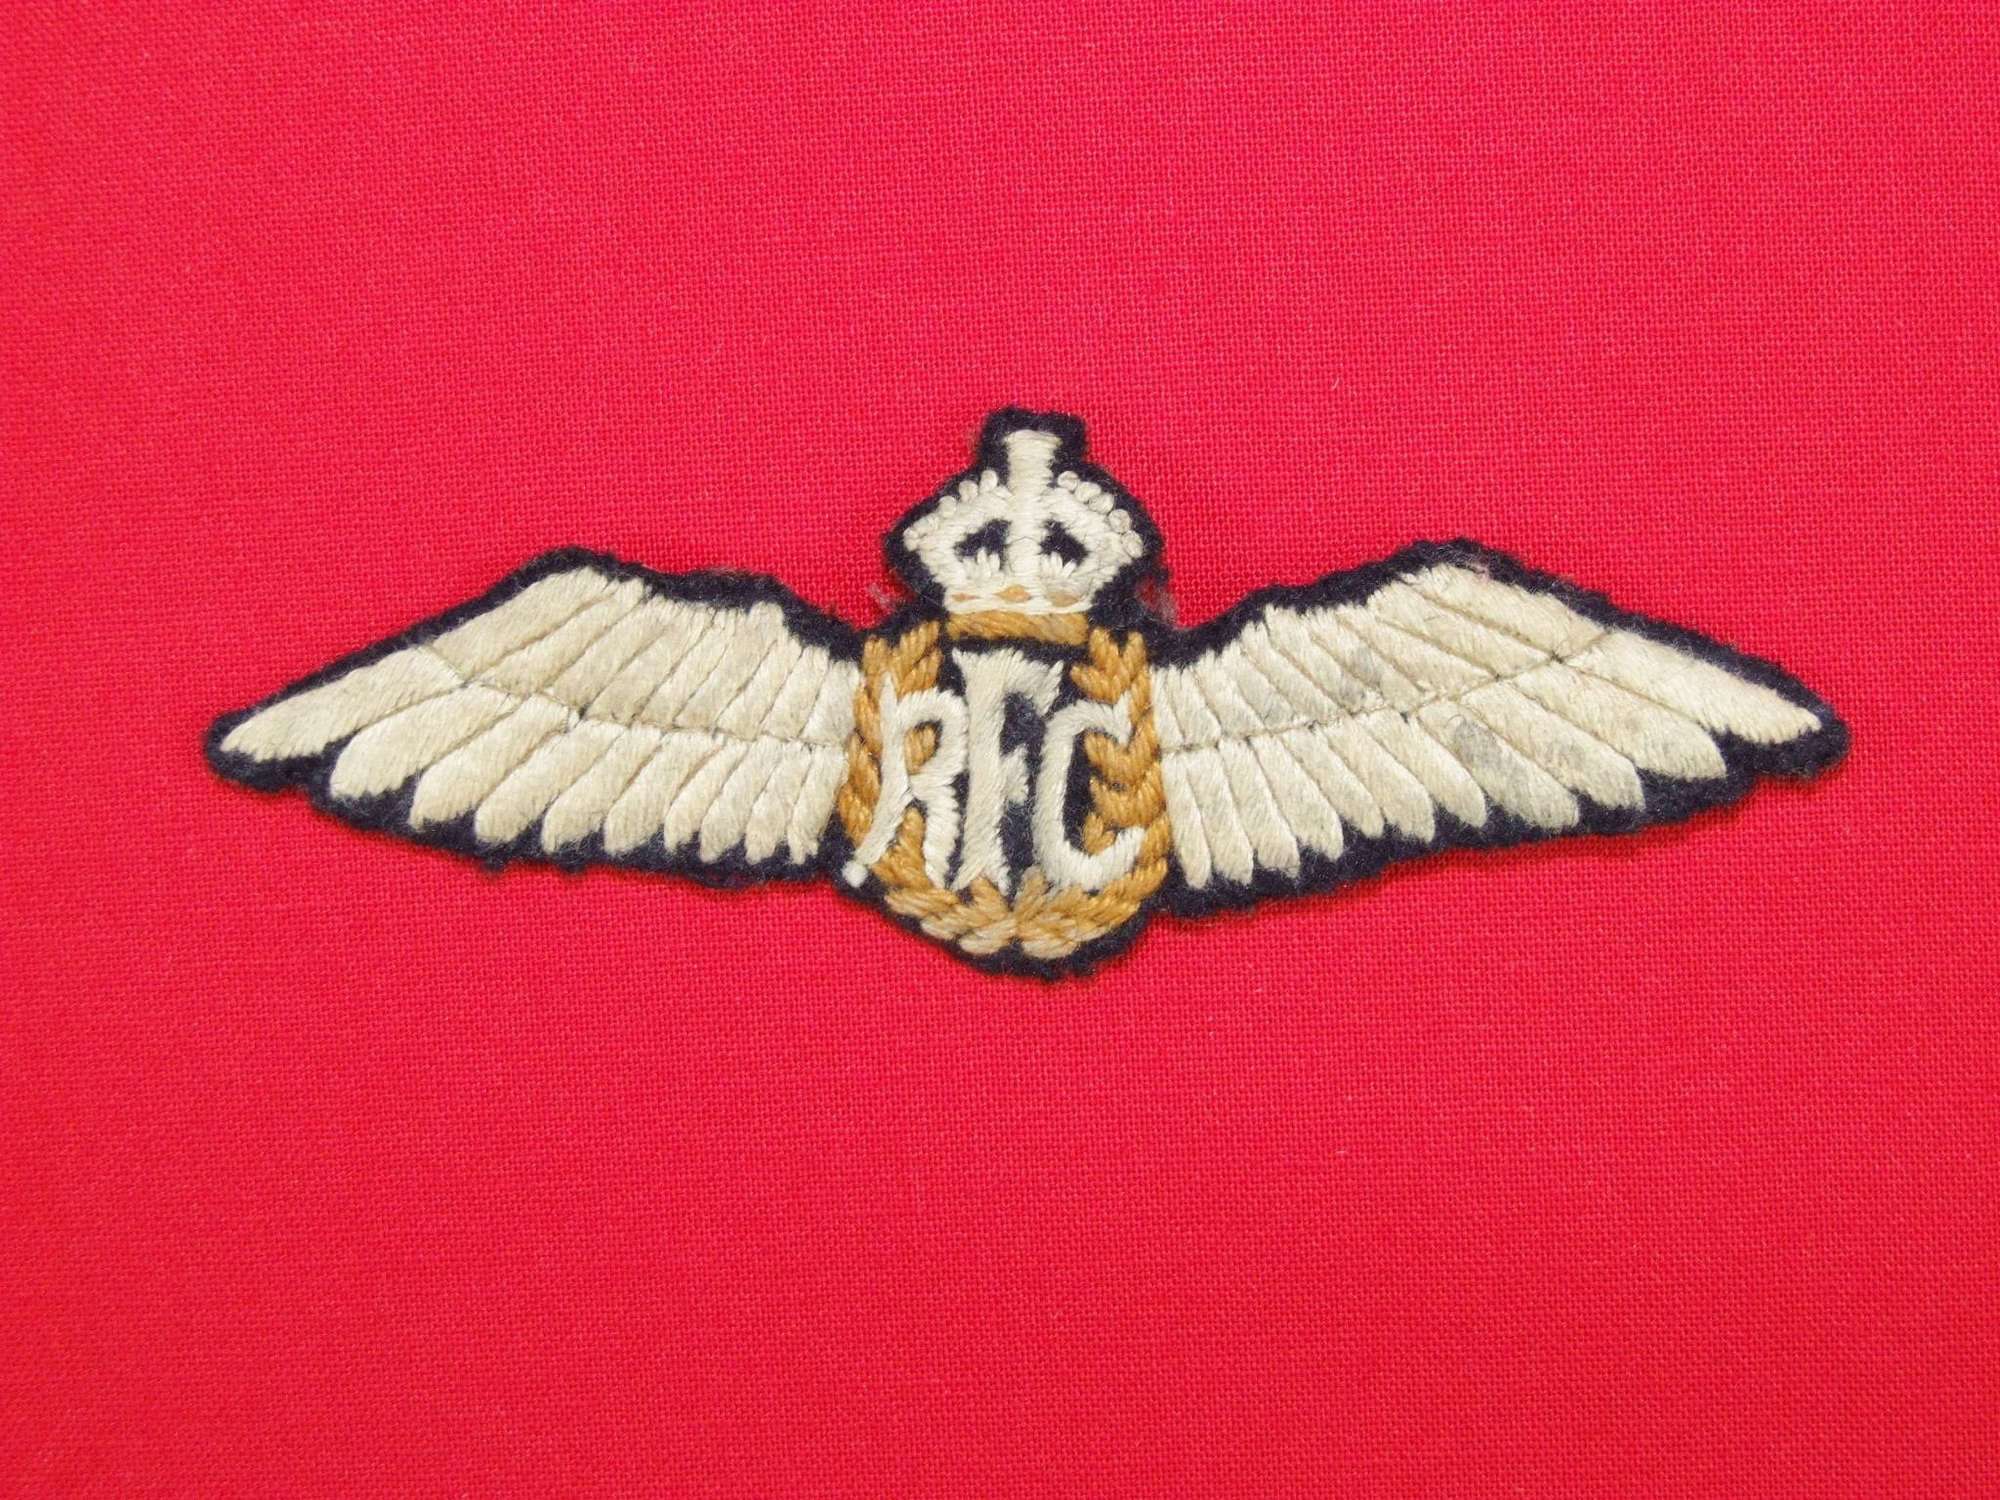 Royal Flying Corps Pilots Wings